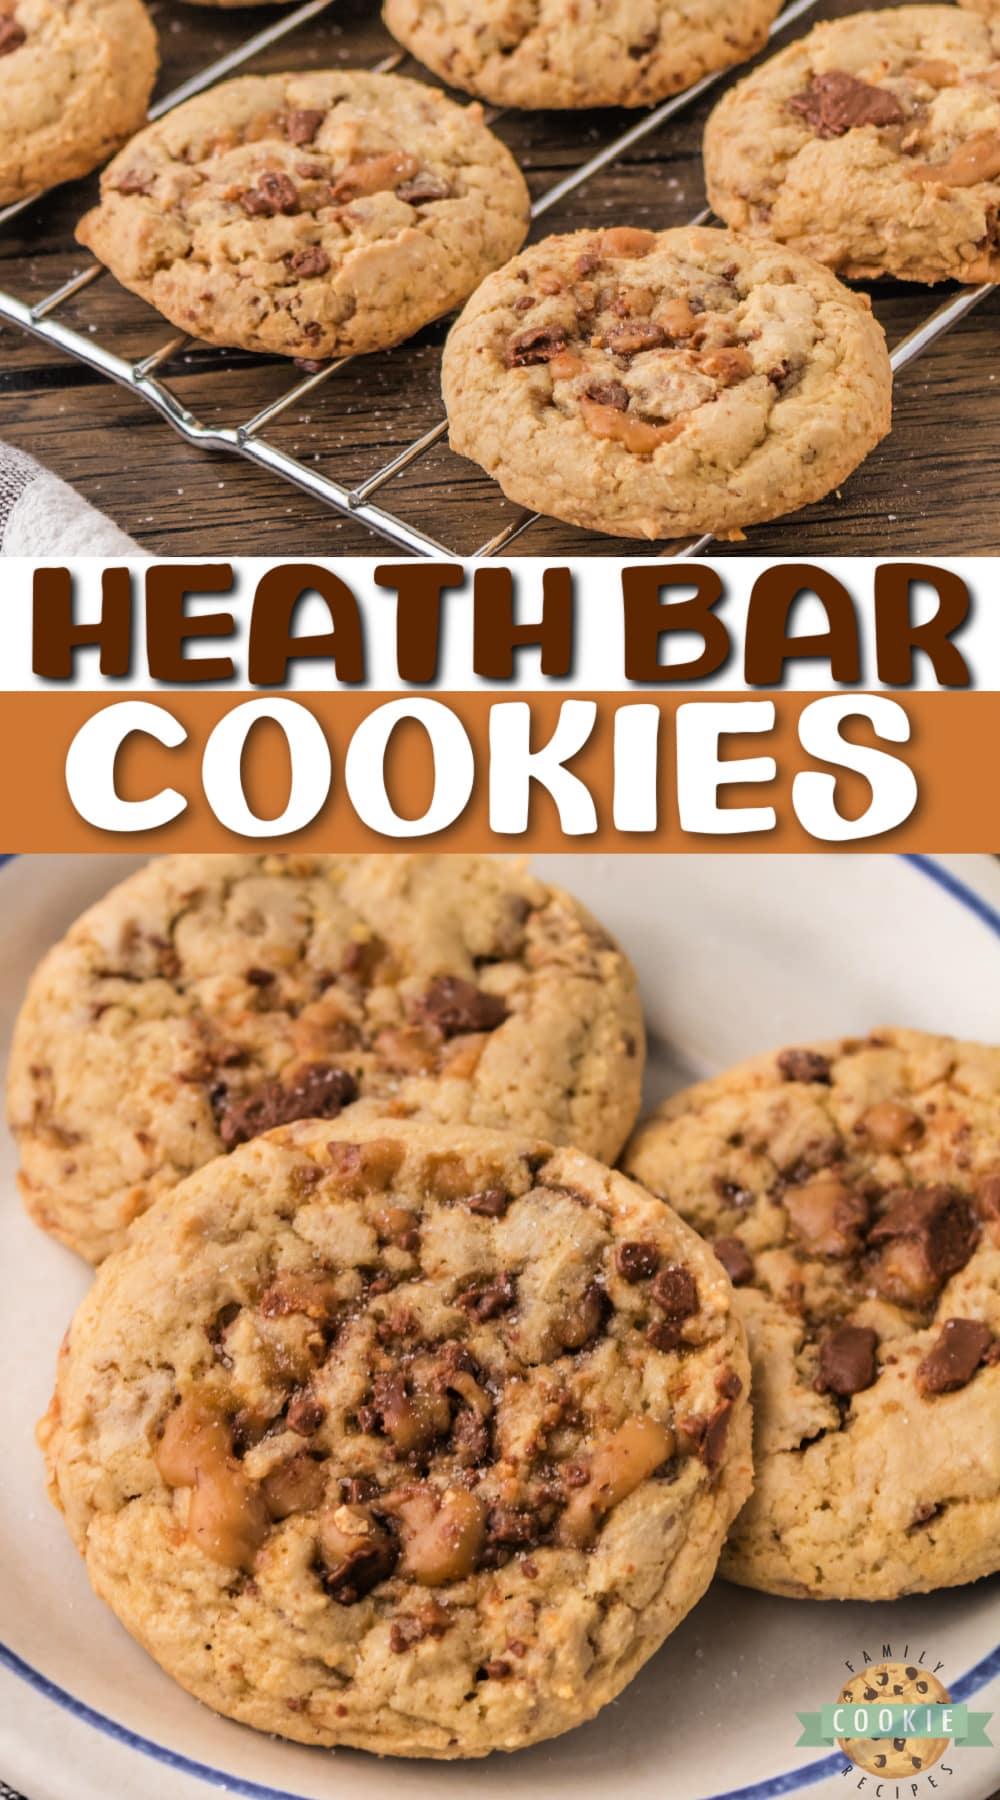 Heath Bar Cookies are soft, chewy and loaded with little bits of crunchy toffee. Simple heath bar cookie recipe that is absolutely delicious!